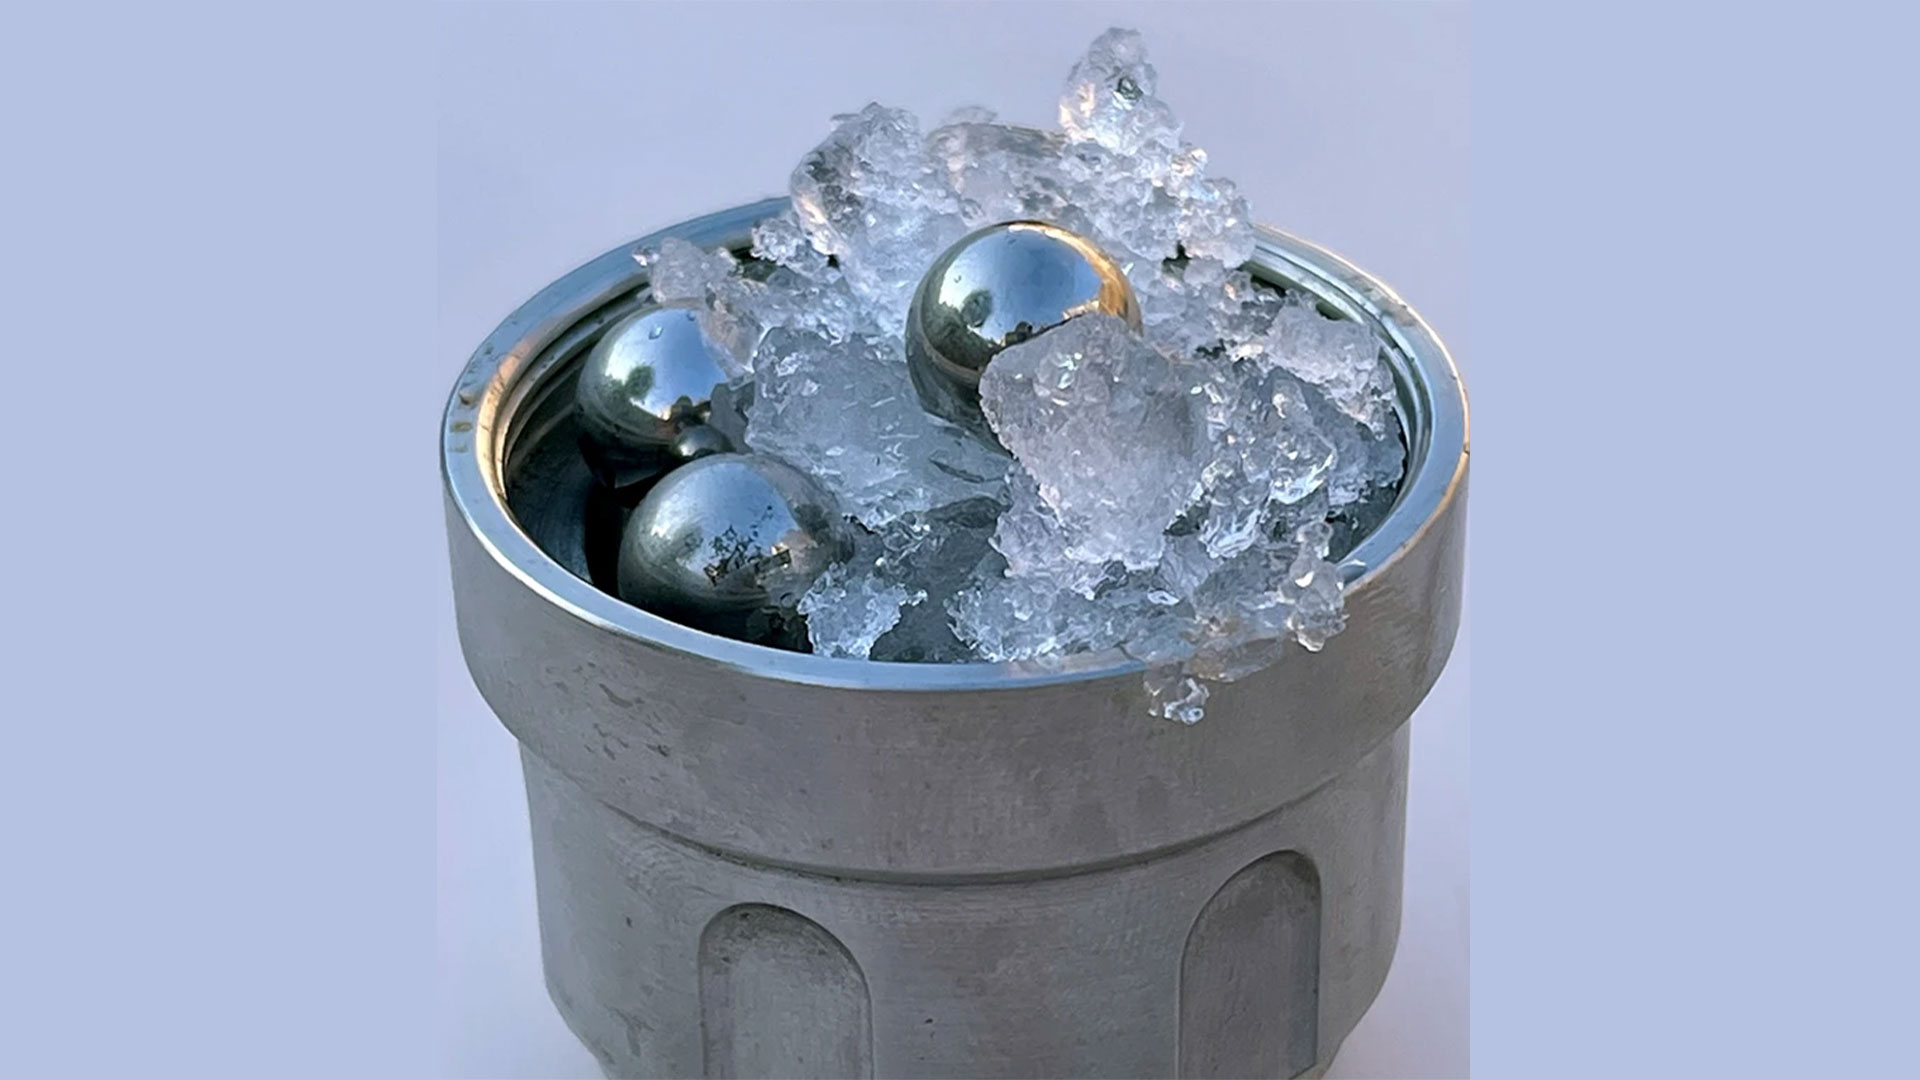 For the find, the team implemented a process using steel balls in a container at about -200 degrees (Credit: University College London)